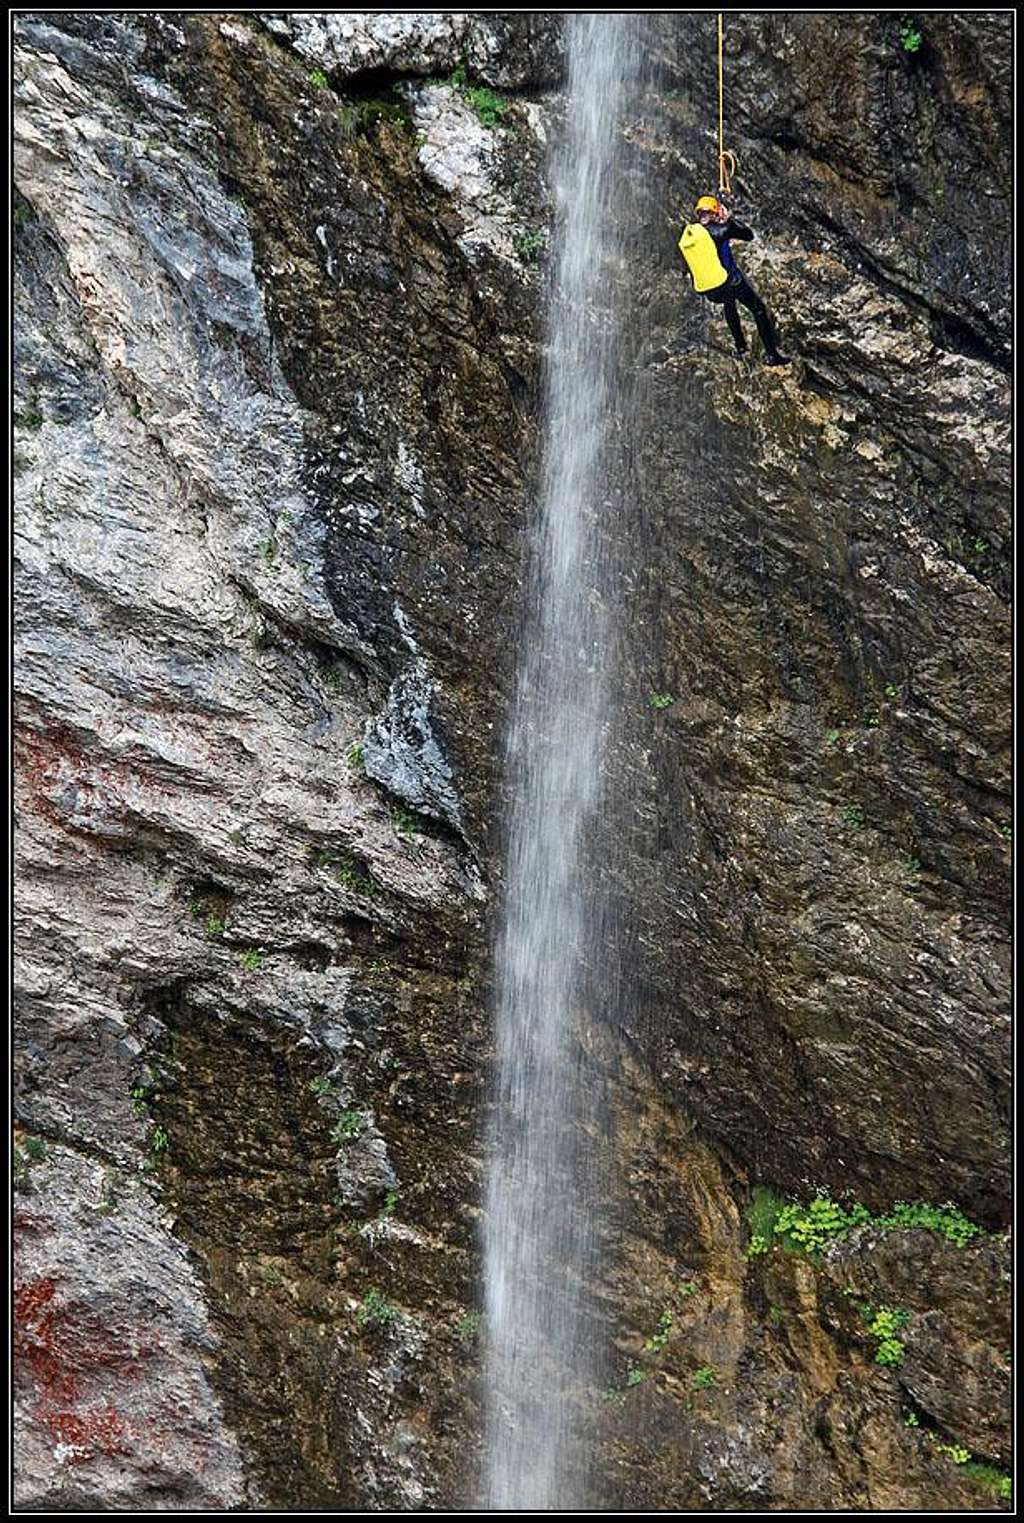 In Parabola waterfall